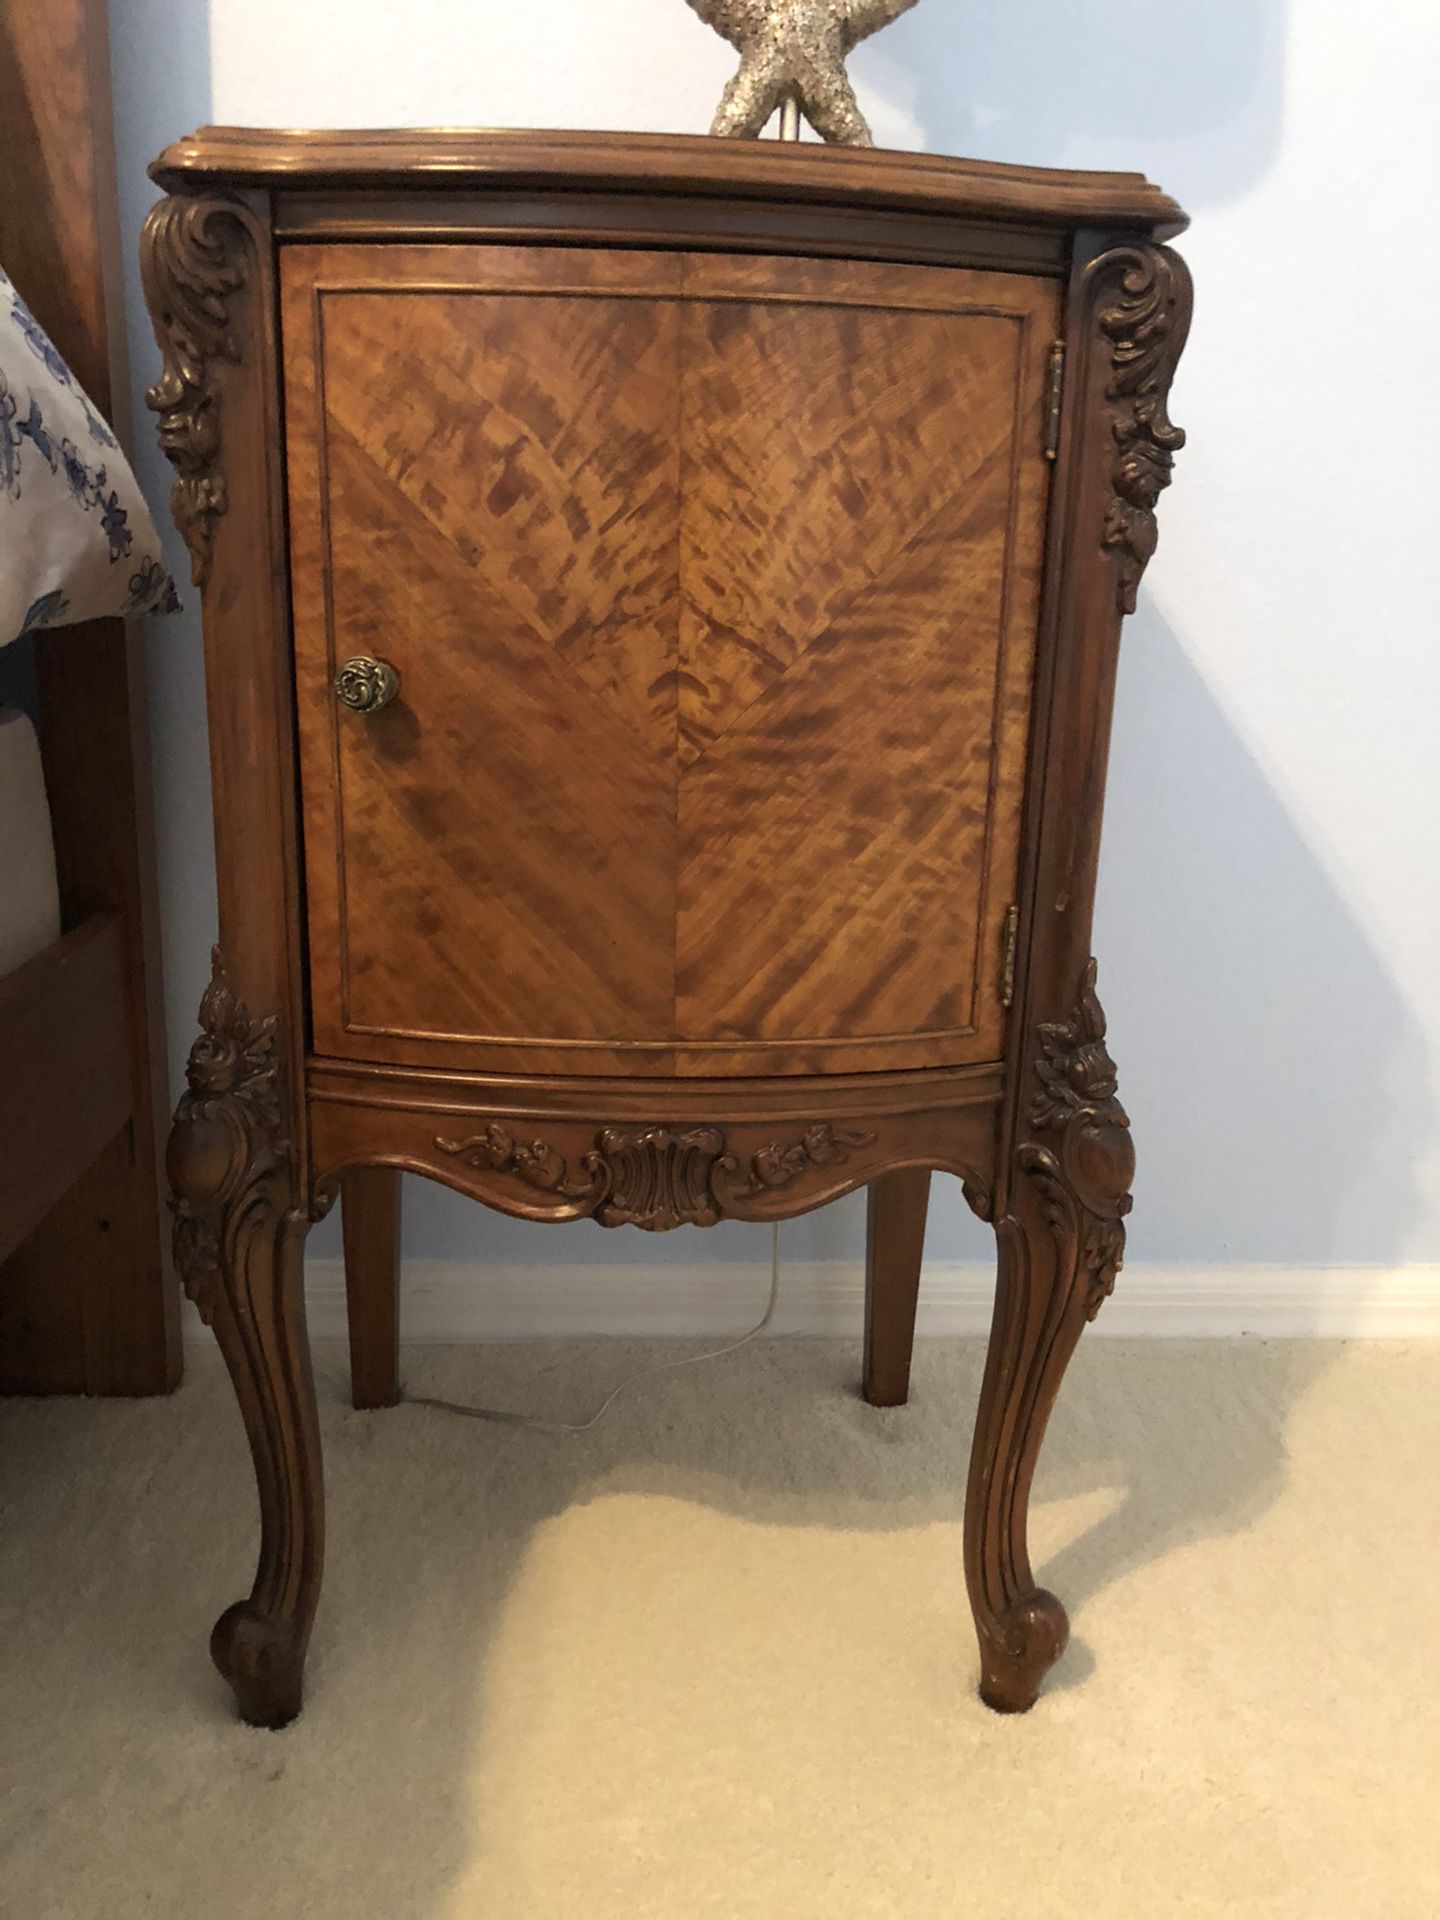 Antique bedside table. Refinished. Perfect condition